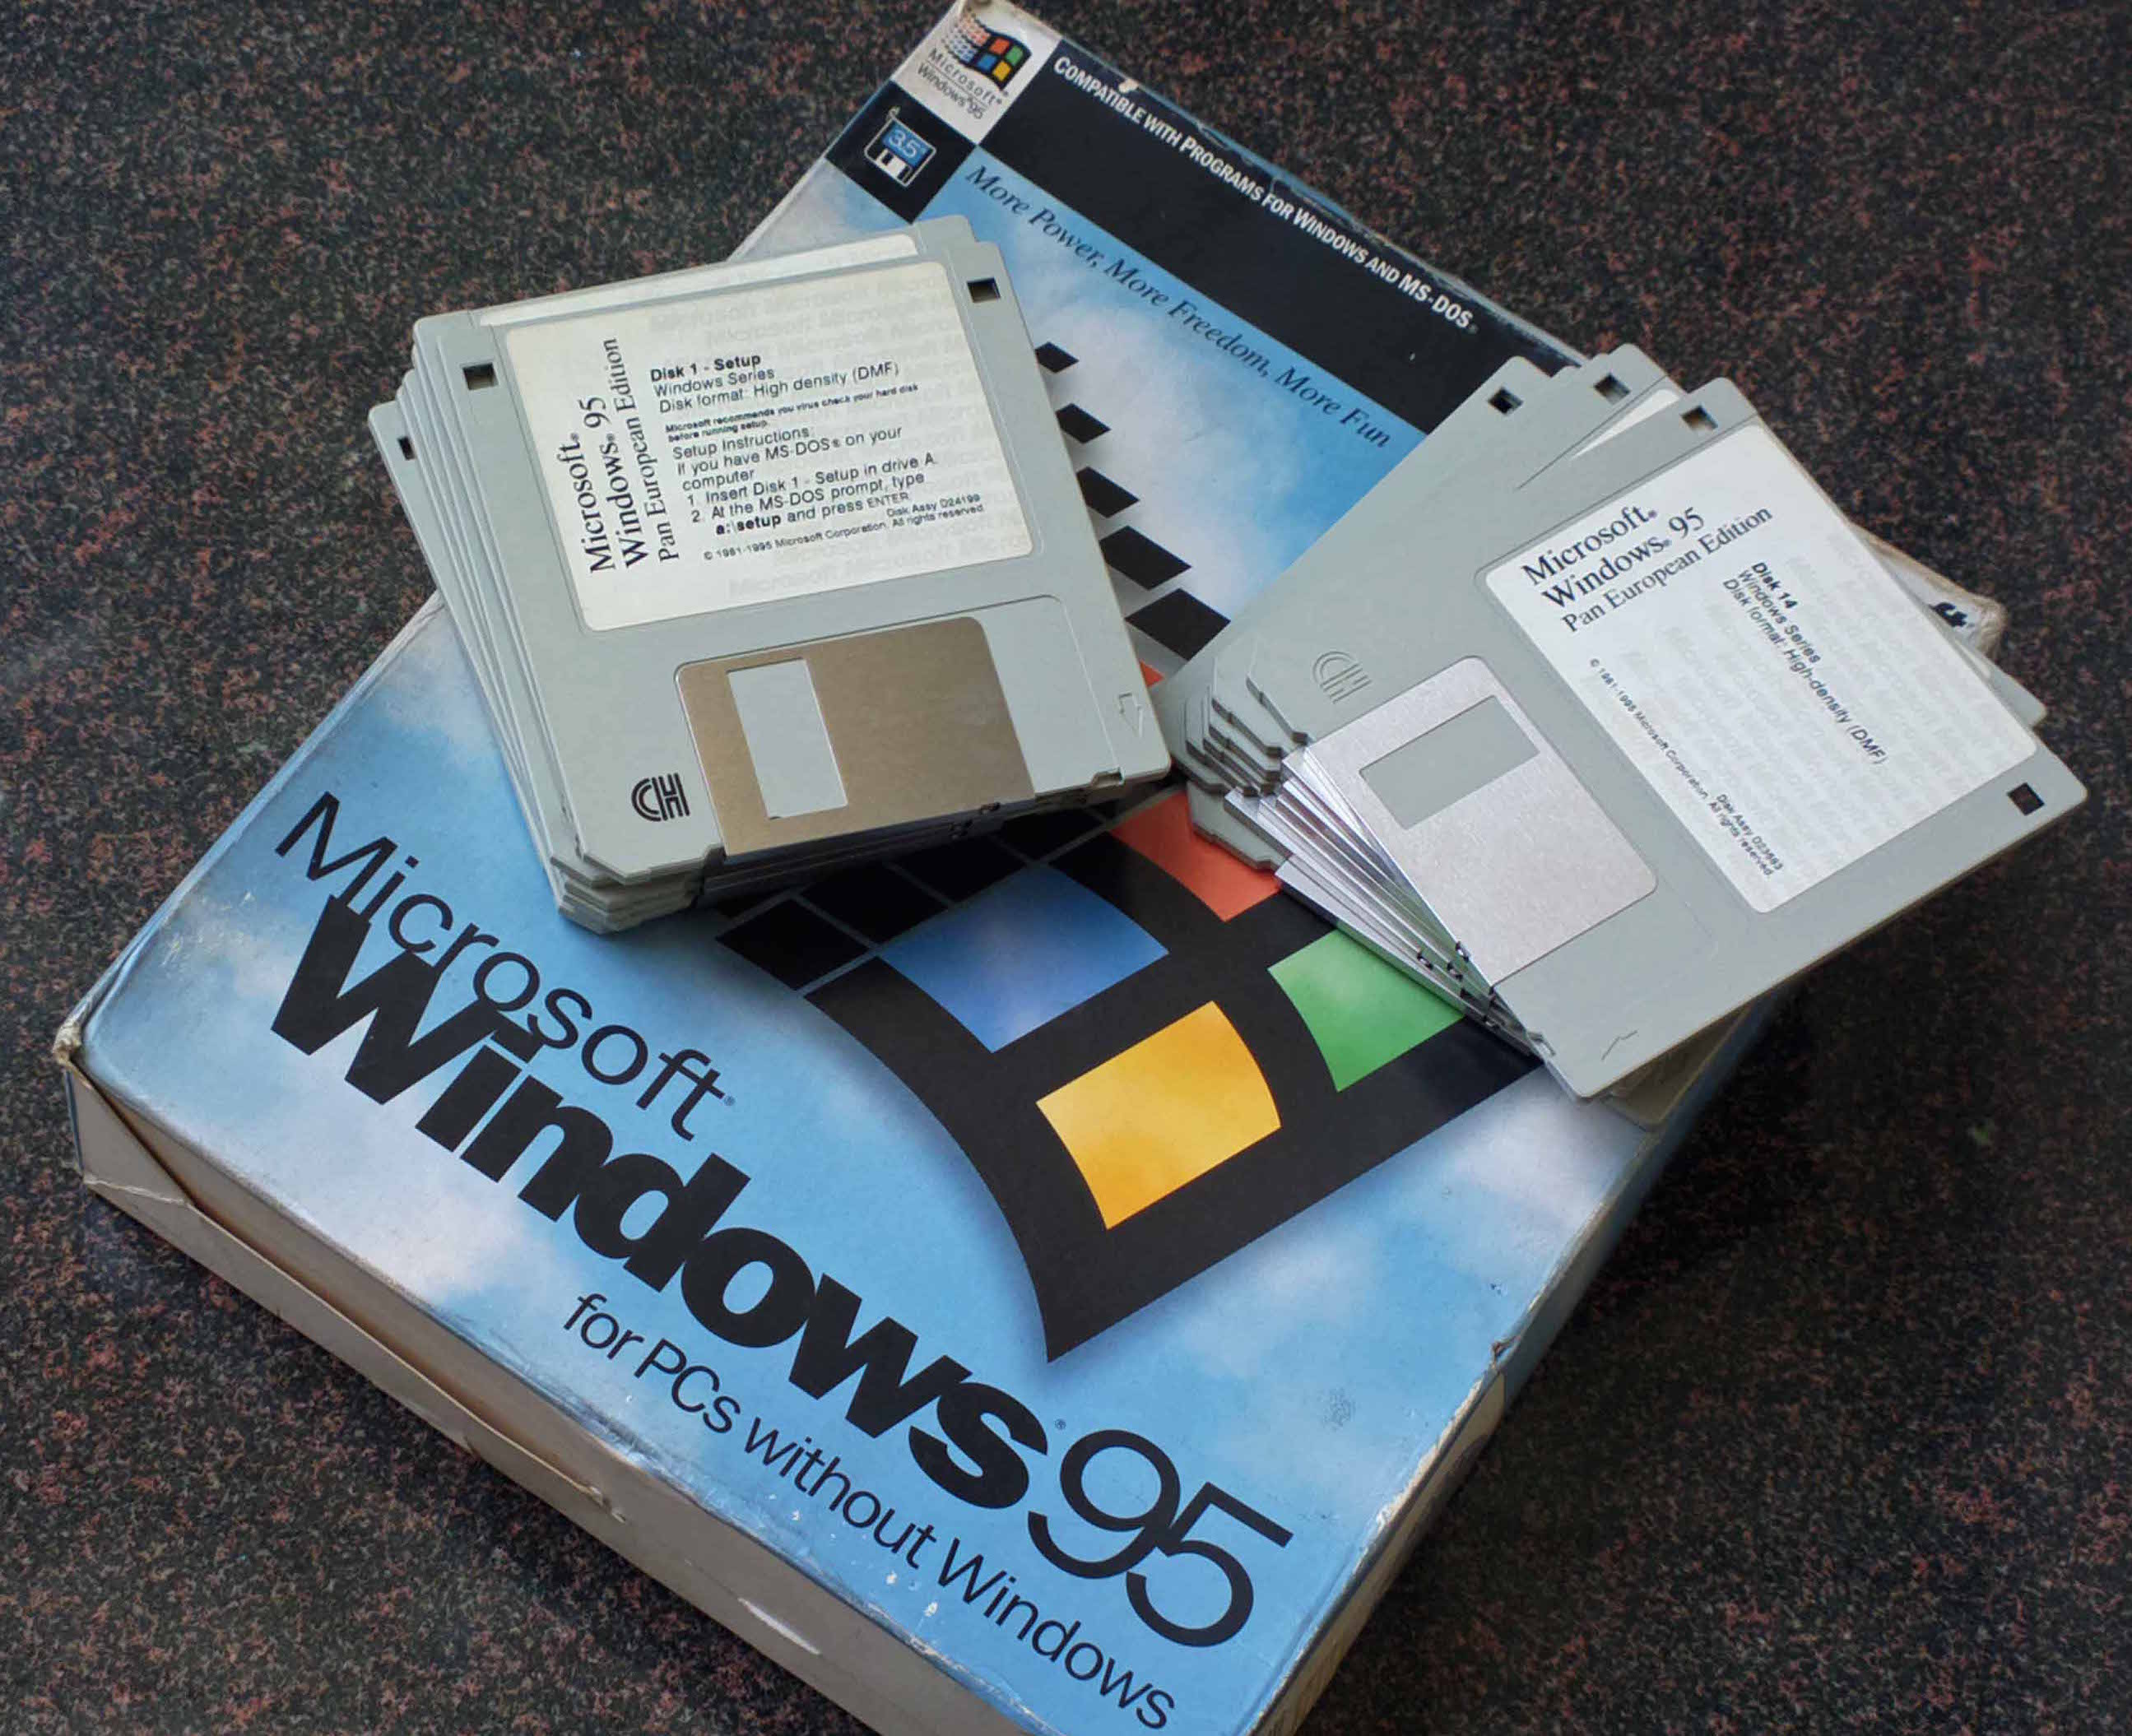 Windows 95 launched 20 years ago this week